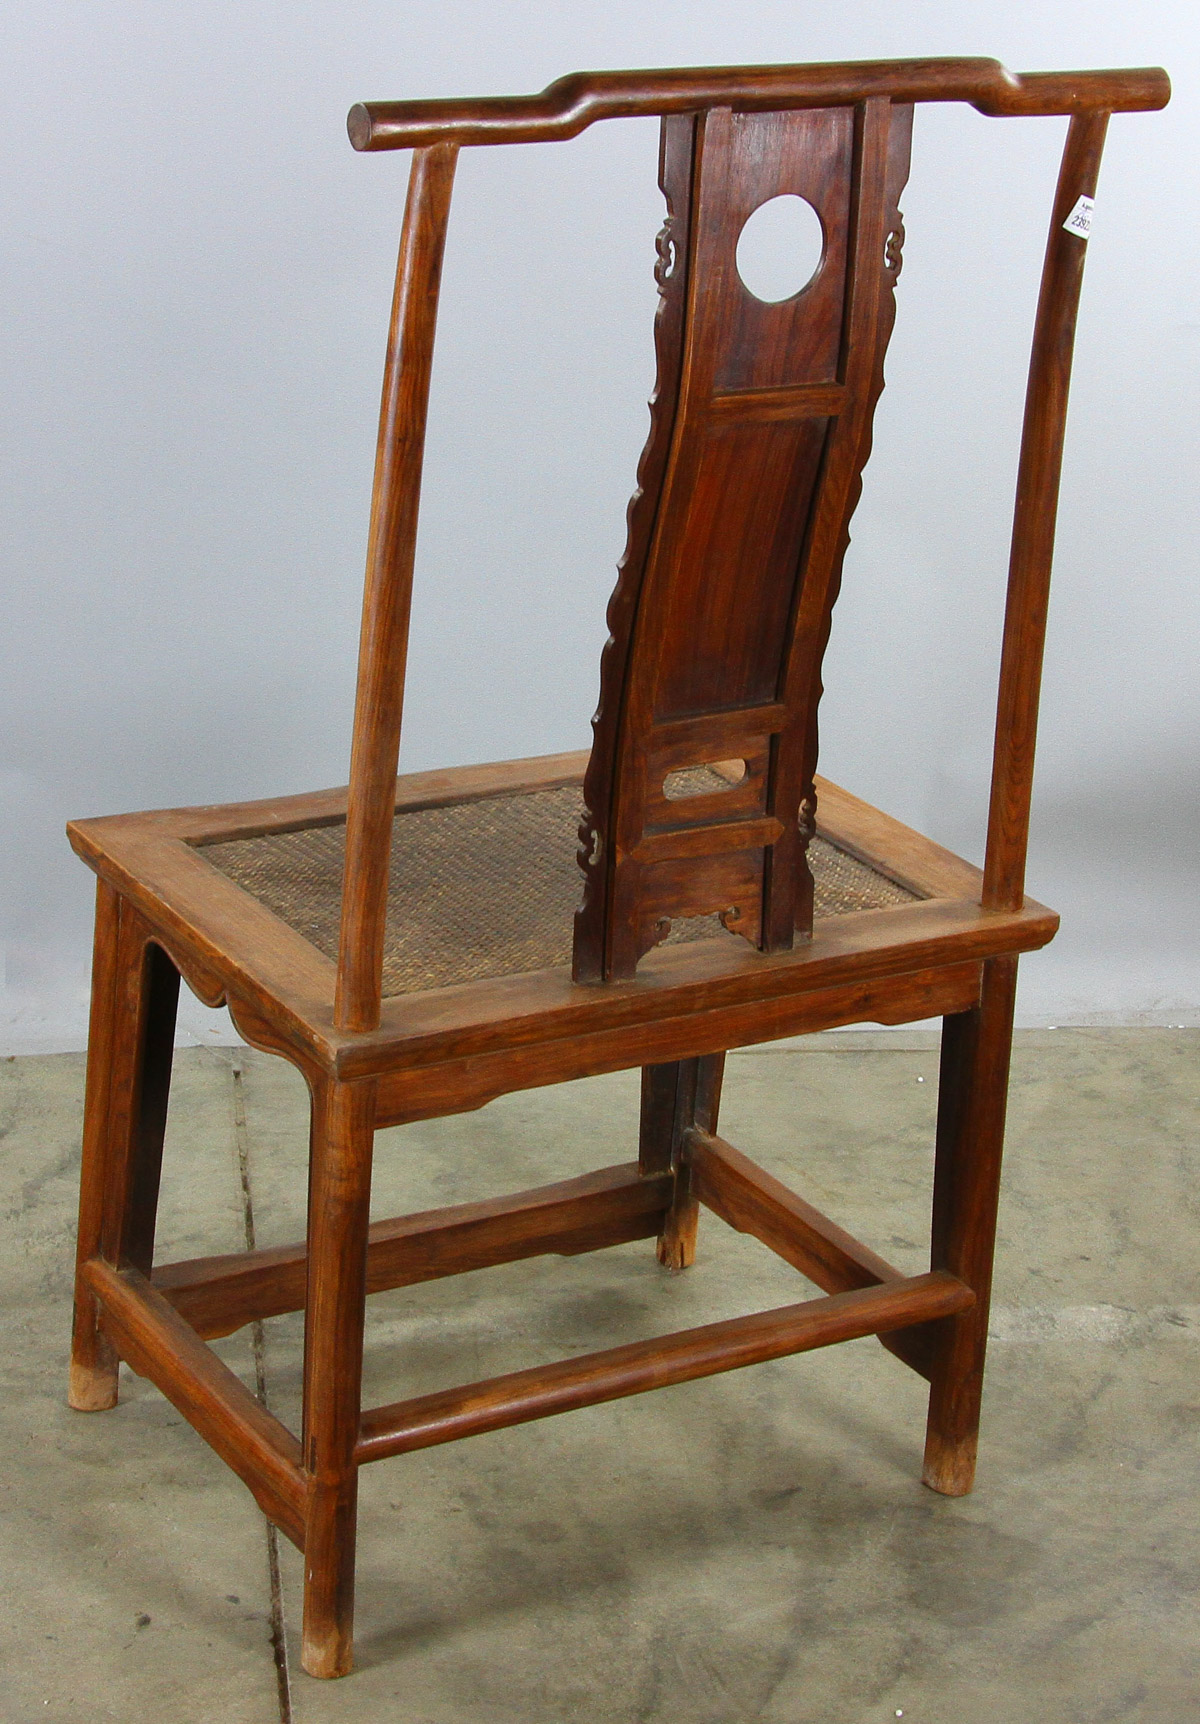 Chinese huali wood chair, 45" x 18" x 24". - Image 3 of 7